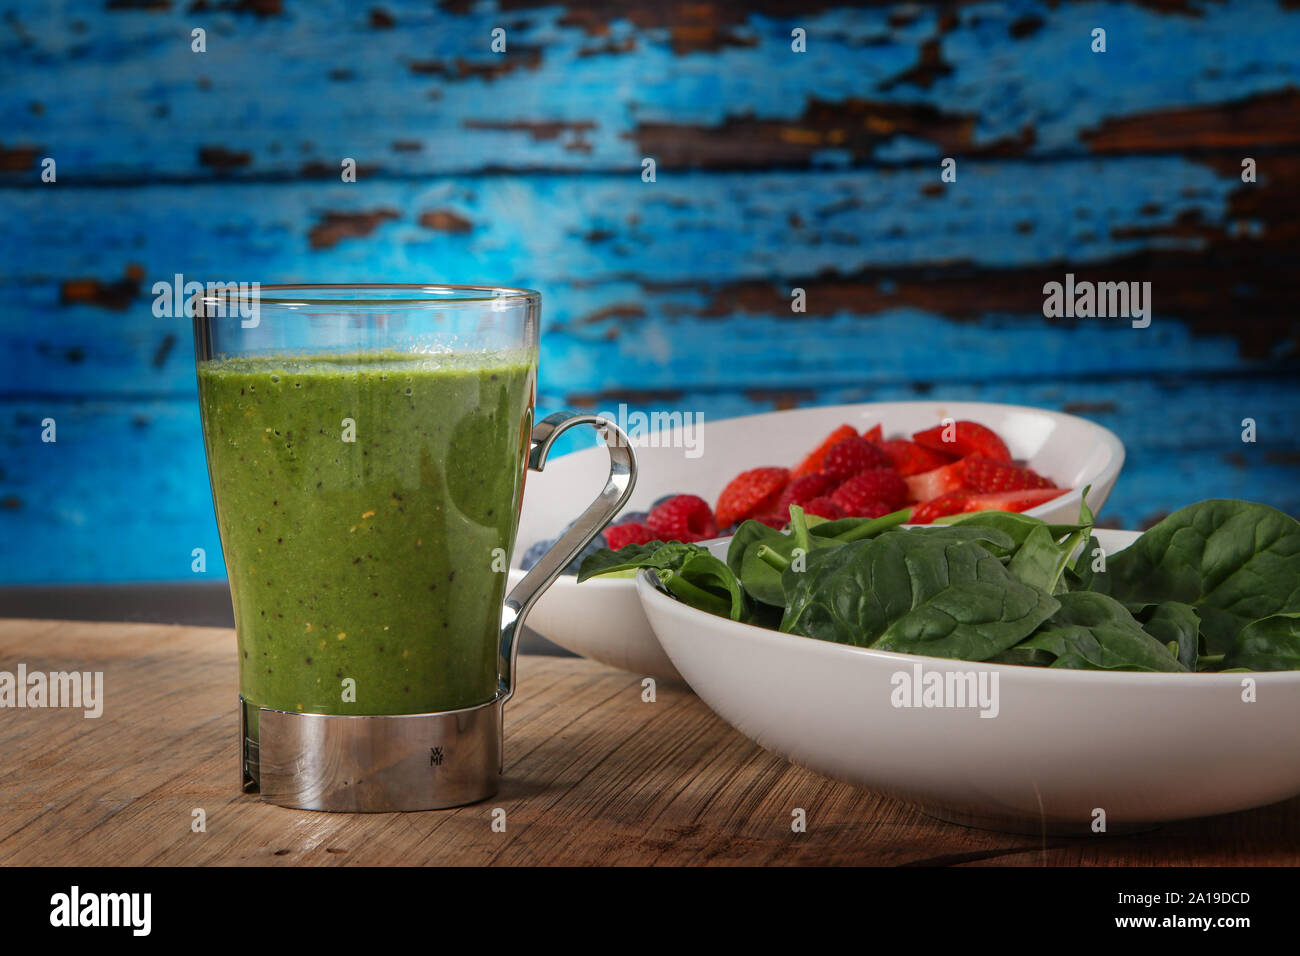 pictures of healthy food and smoothies Stock Photo